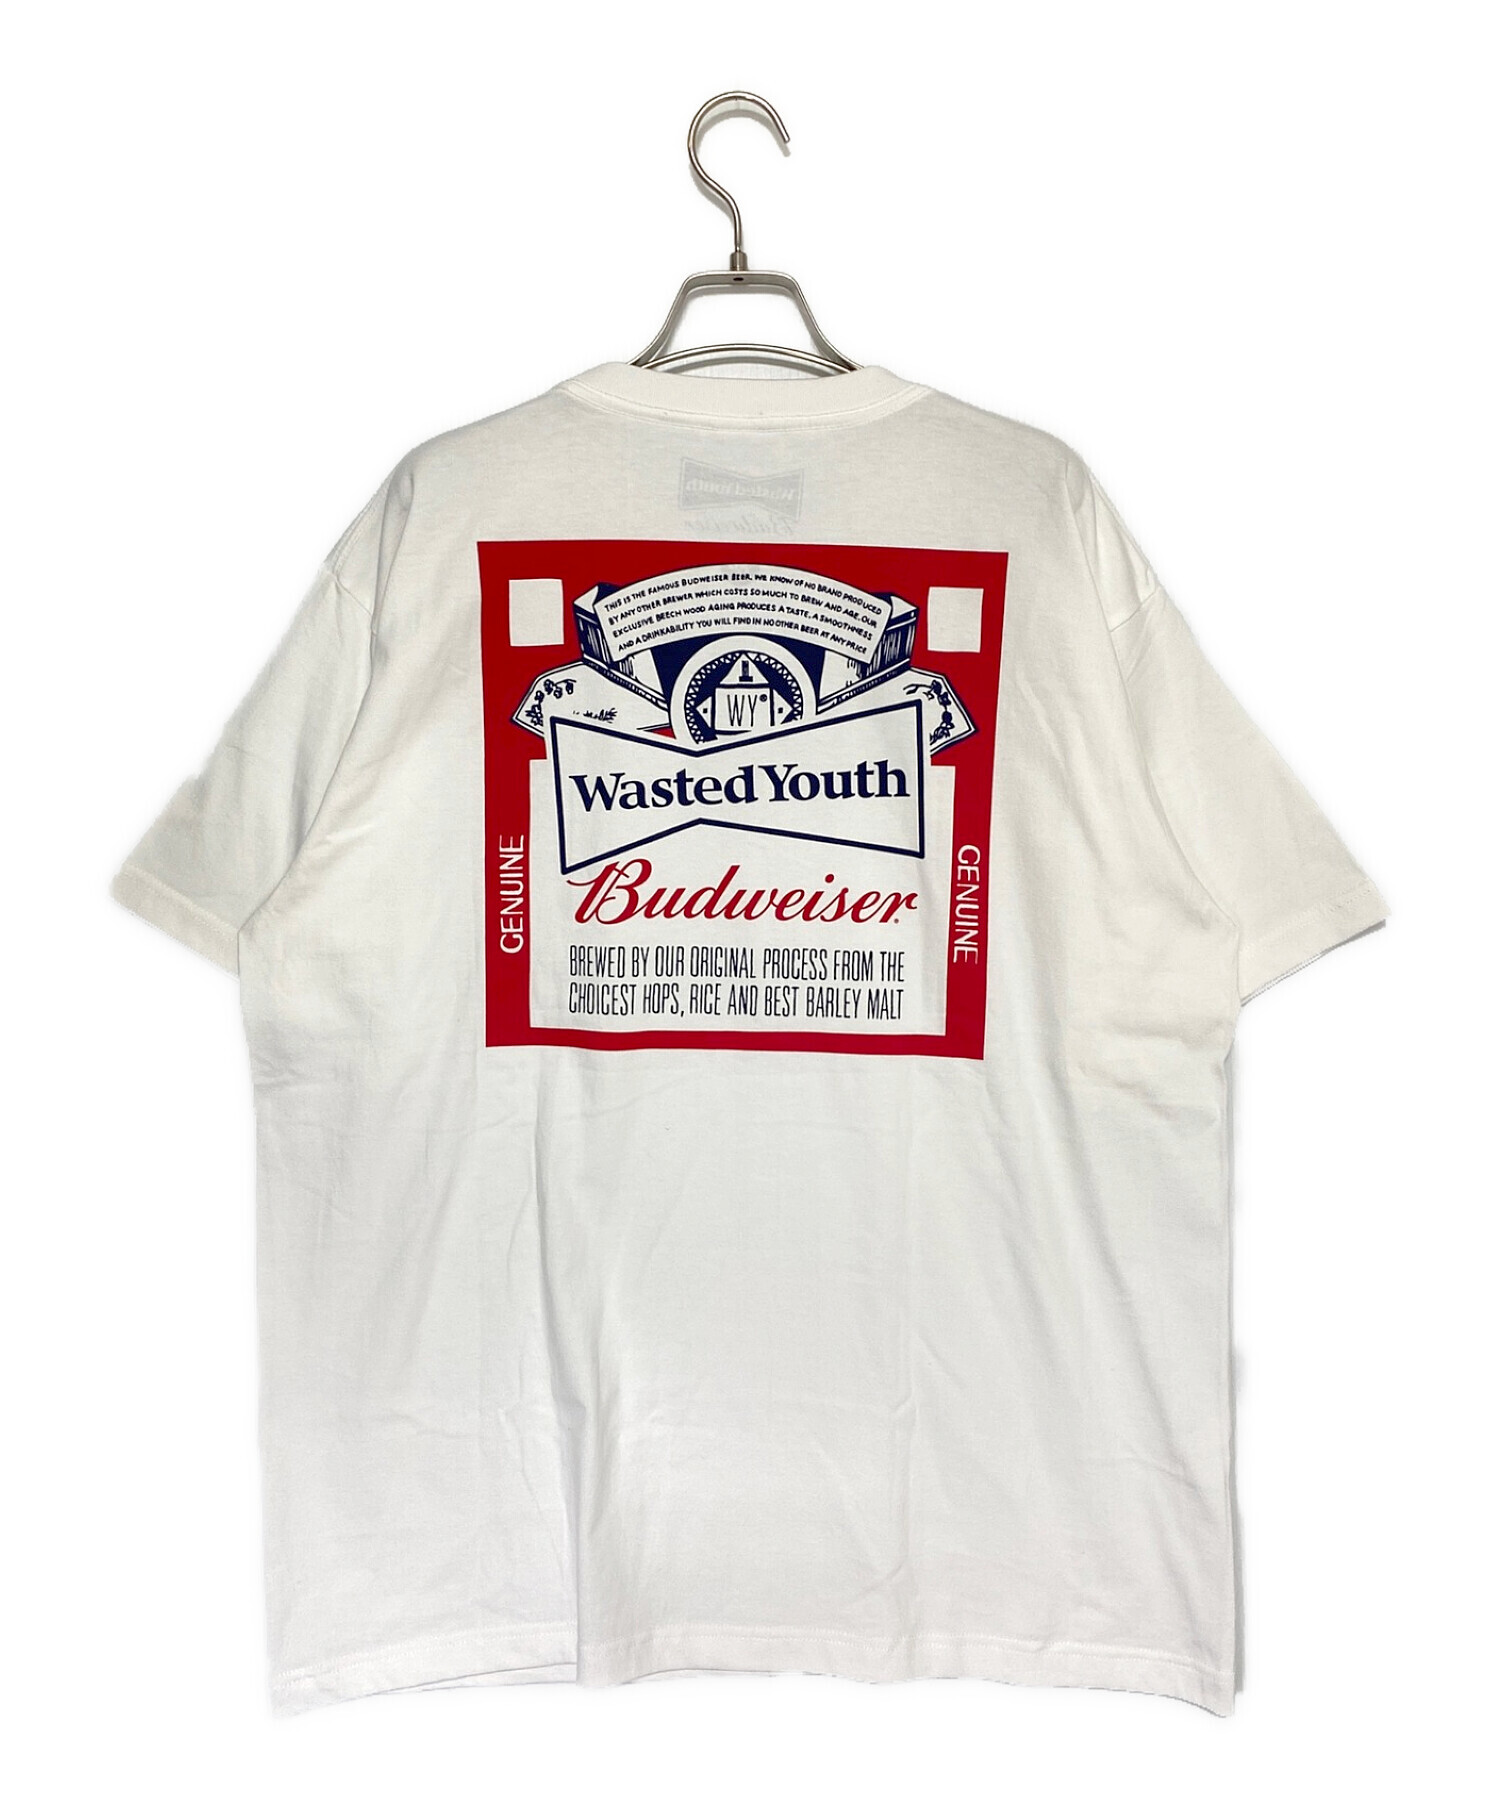 Wasted Youth Budweiser L/S T White XL